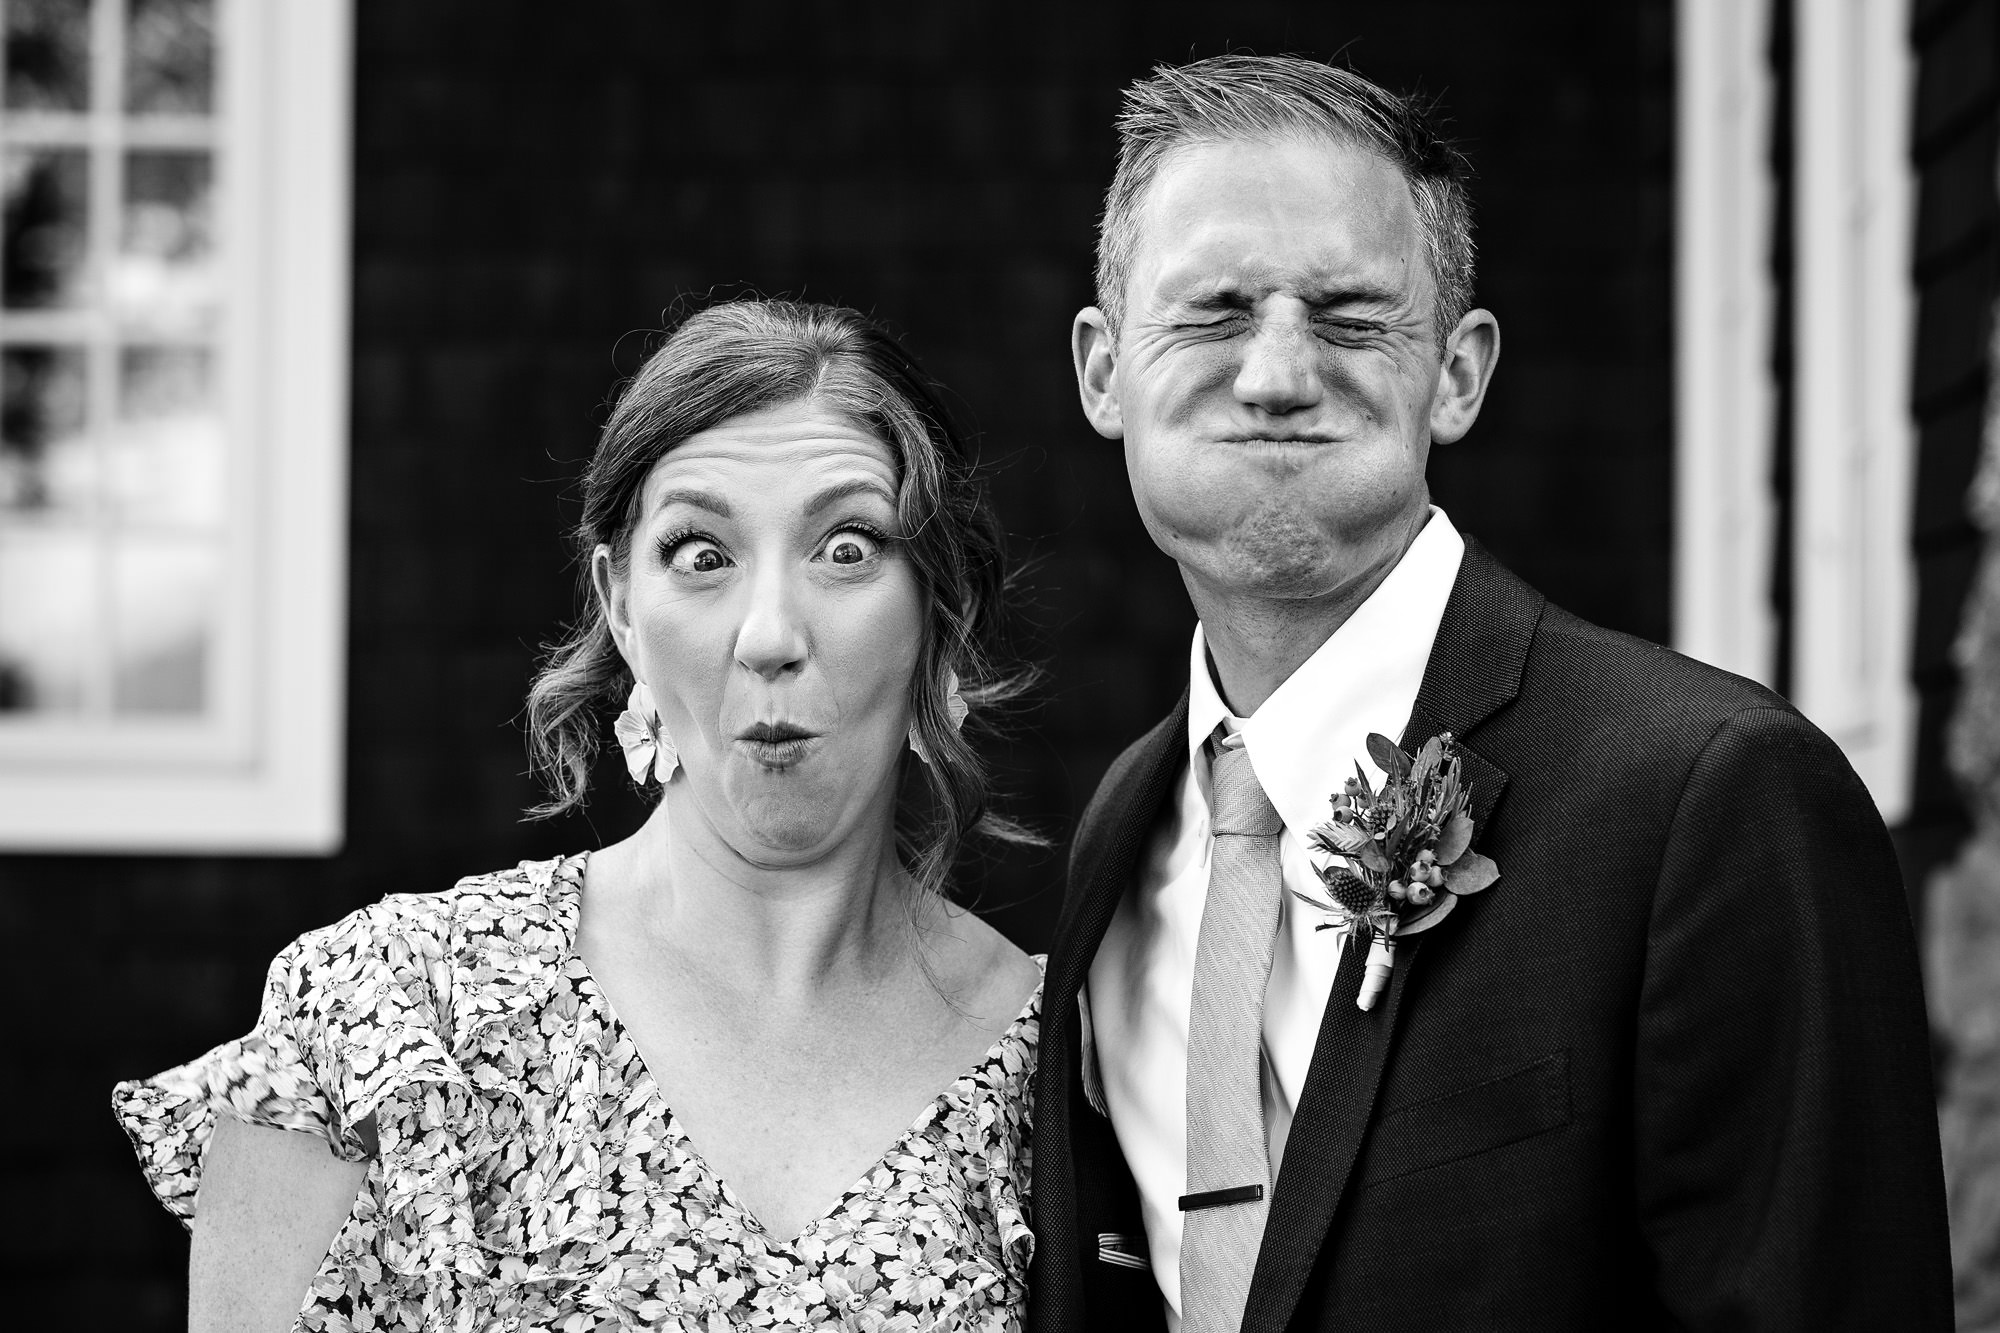 The groom and his sister make funny faces in front of the camera.